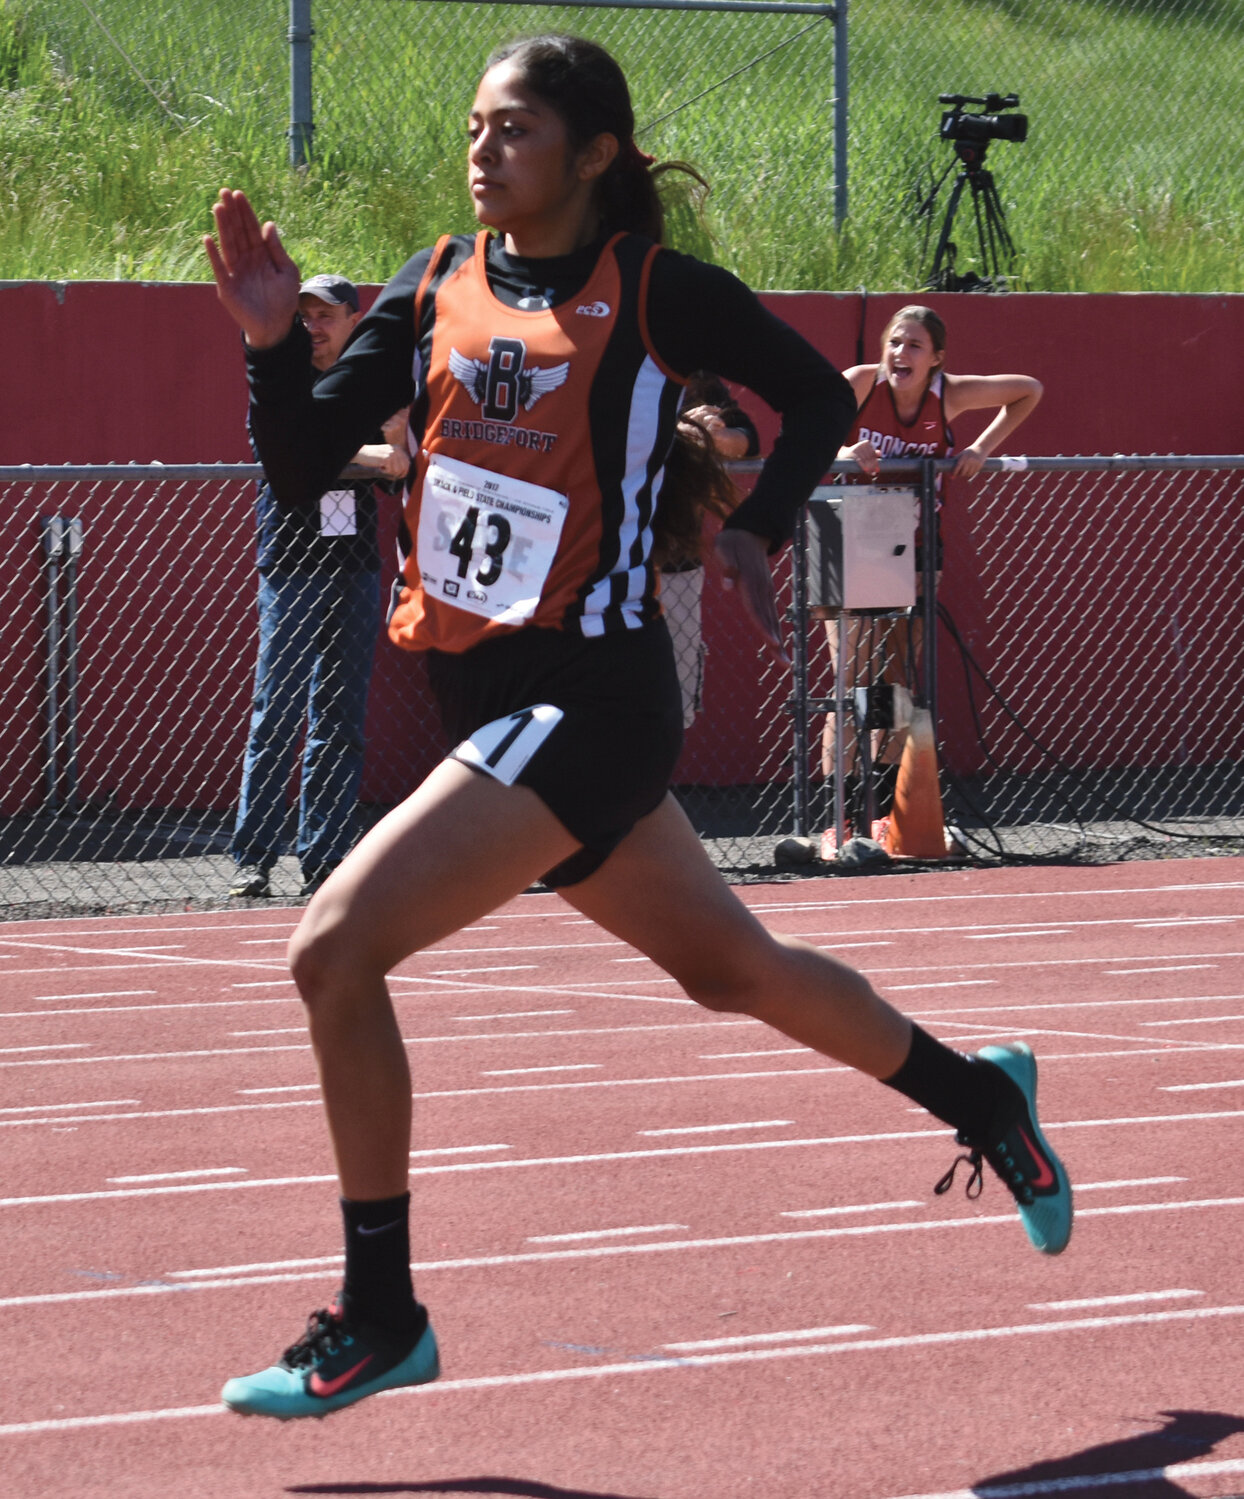 Esmeralda Garcia finished in 13th place in the girls 400m with a time of 1:05.52.